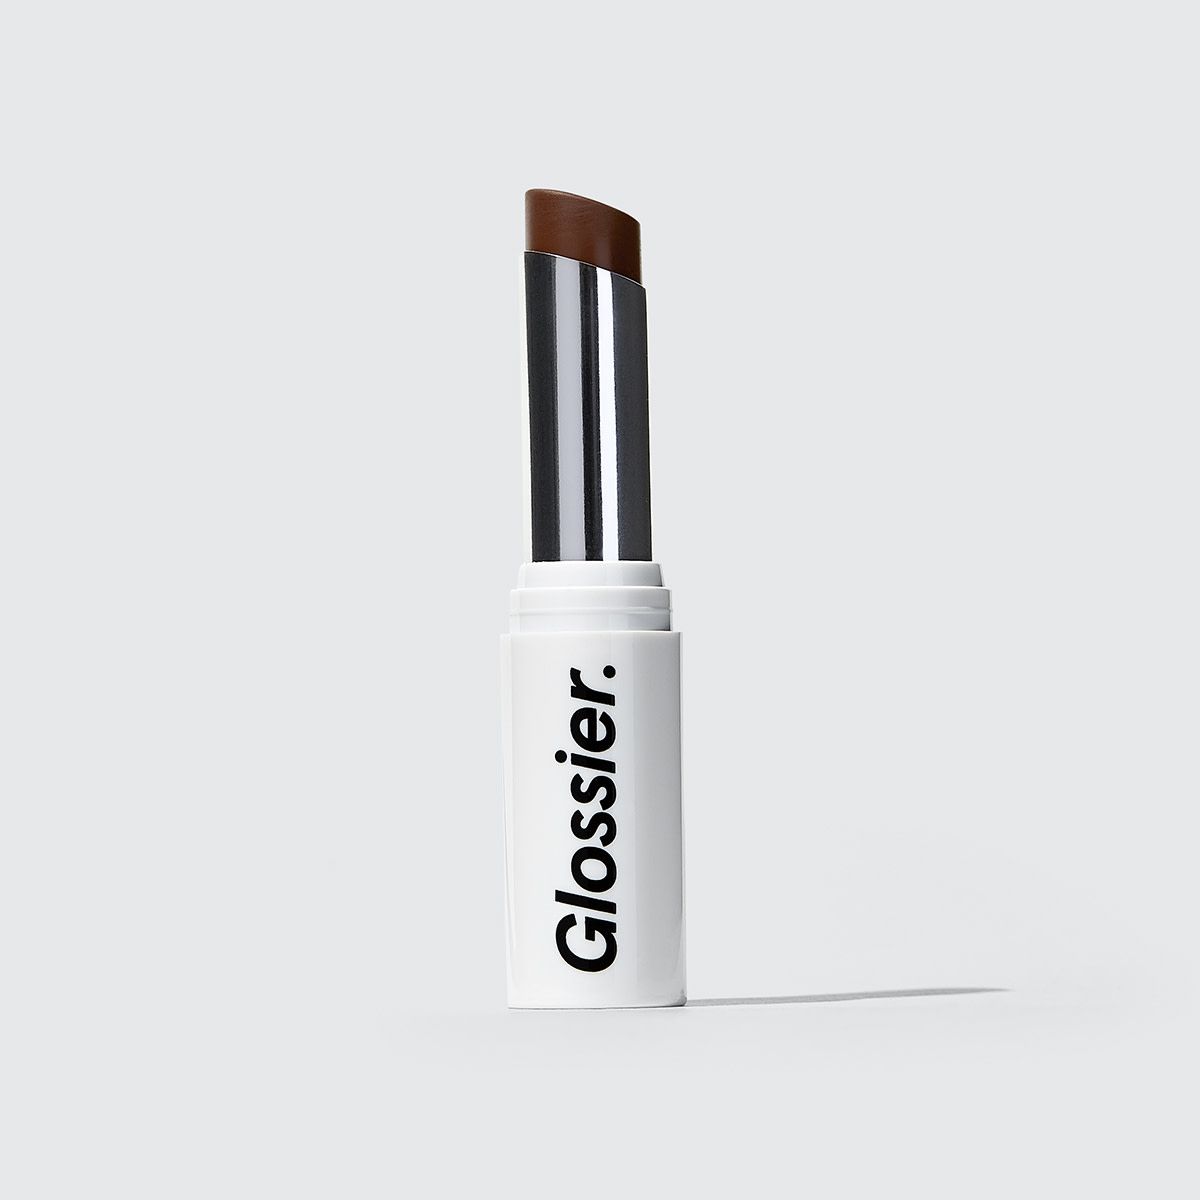 Glossier Generation G Lipstick in Jam, a deep berry magenta, 0.07 oz, enhancing sheer matte lipstick that adapts to you | Glossier